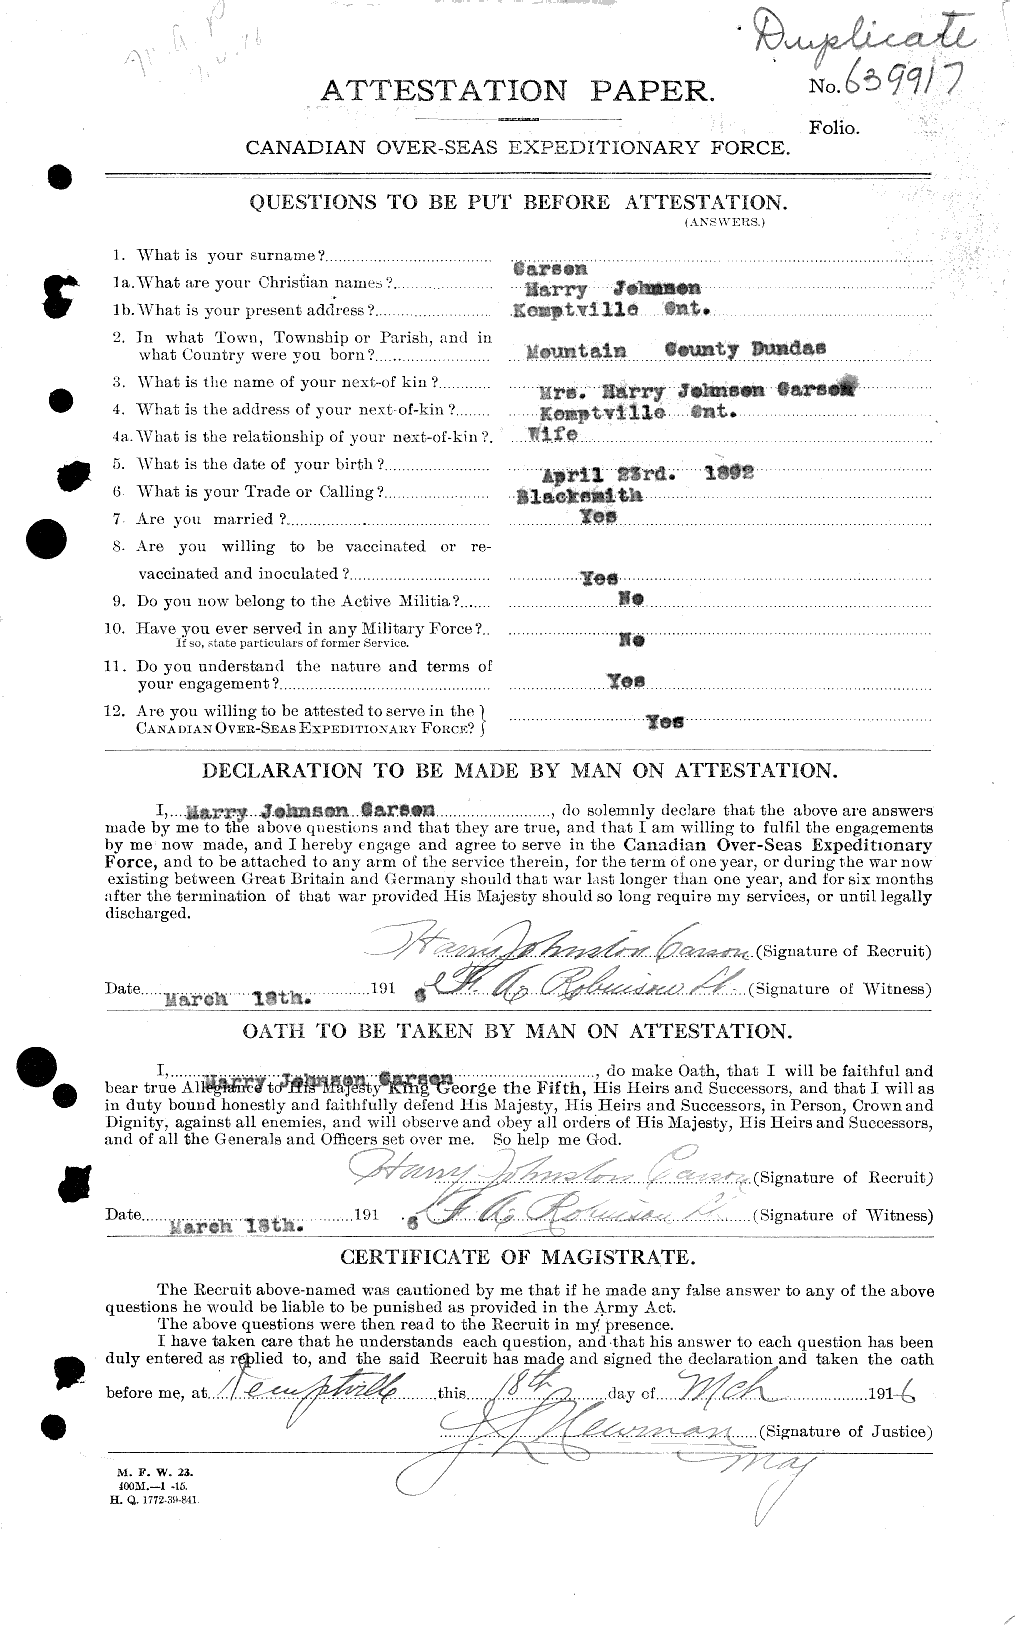 Personnel Records of the First World War - CEF 010768a